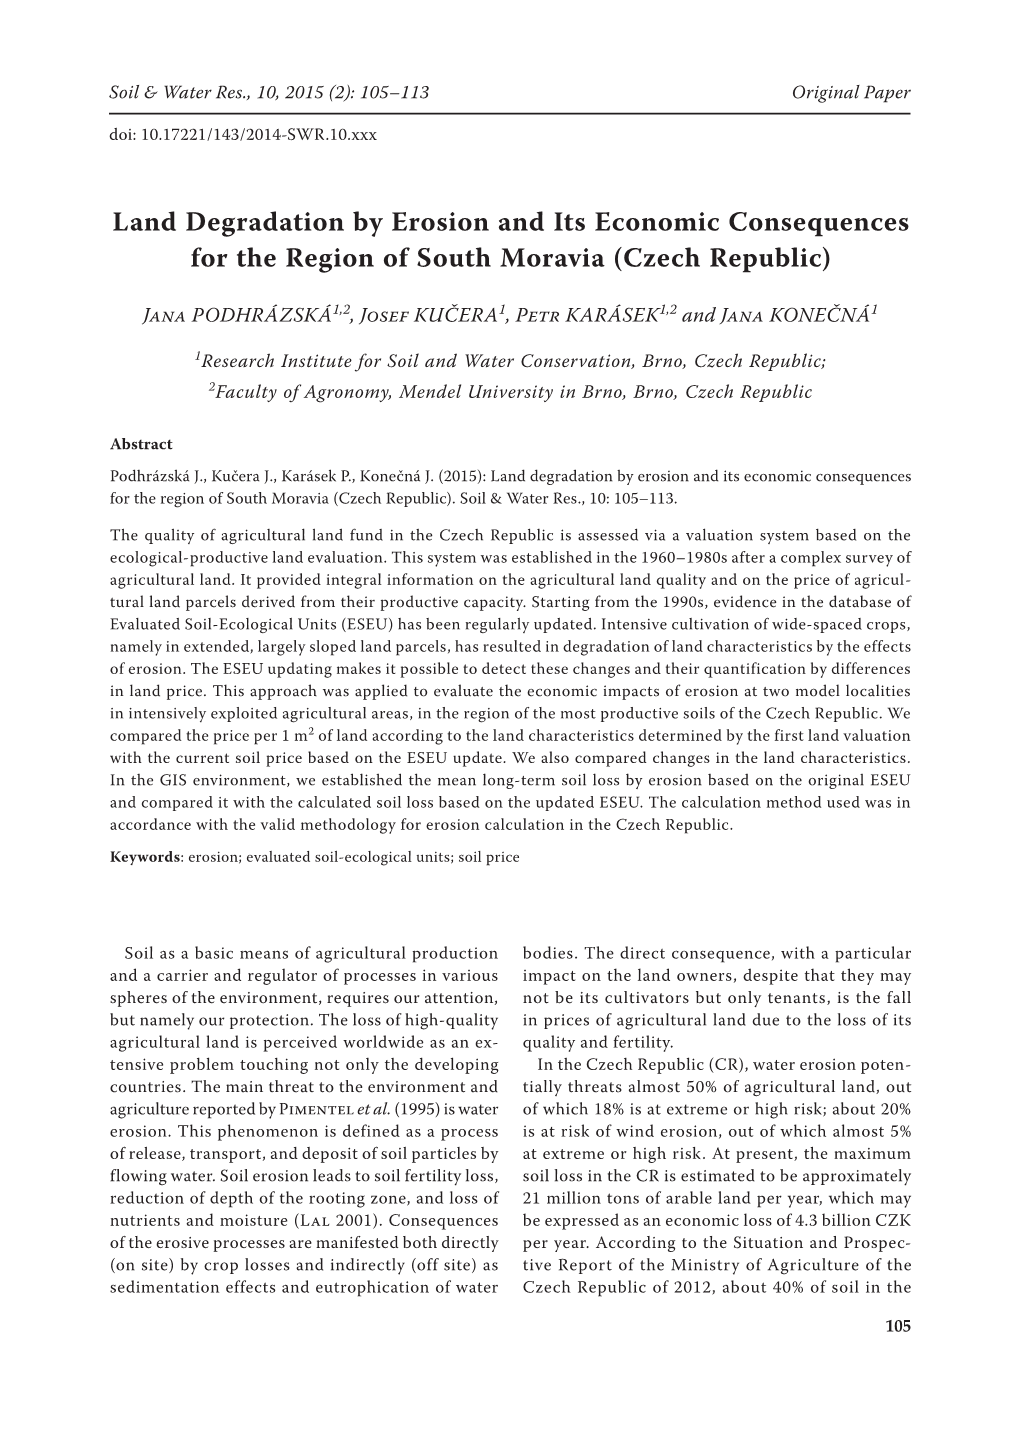 Land Degradation by Erosion and Its Economic Consequences for the Region of South Moravia (Czech Republic)